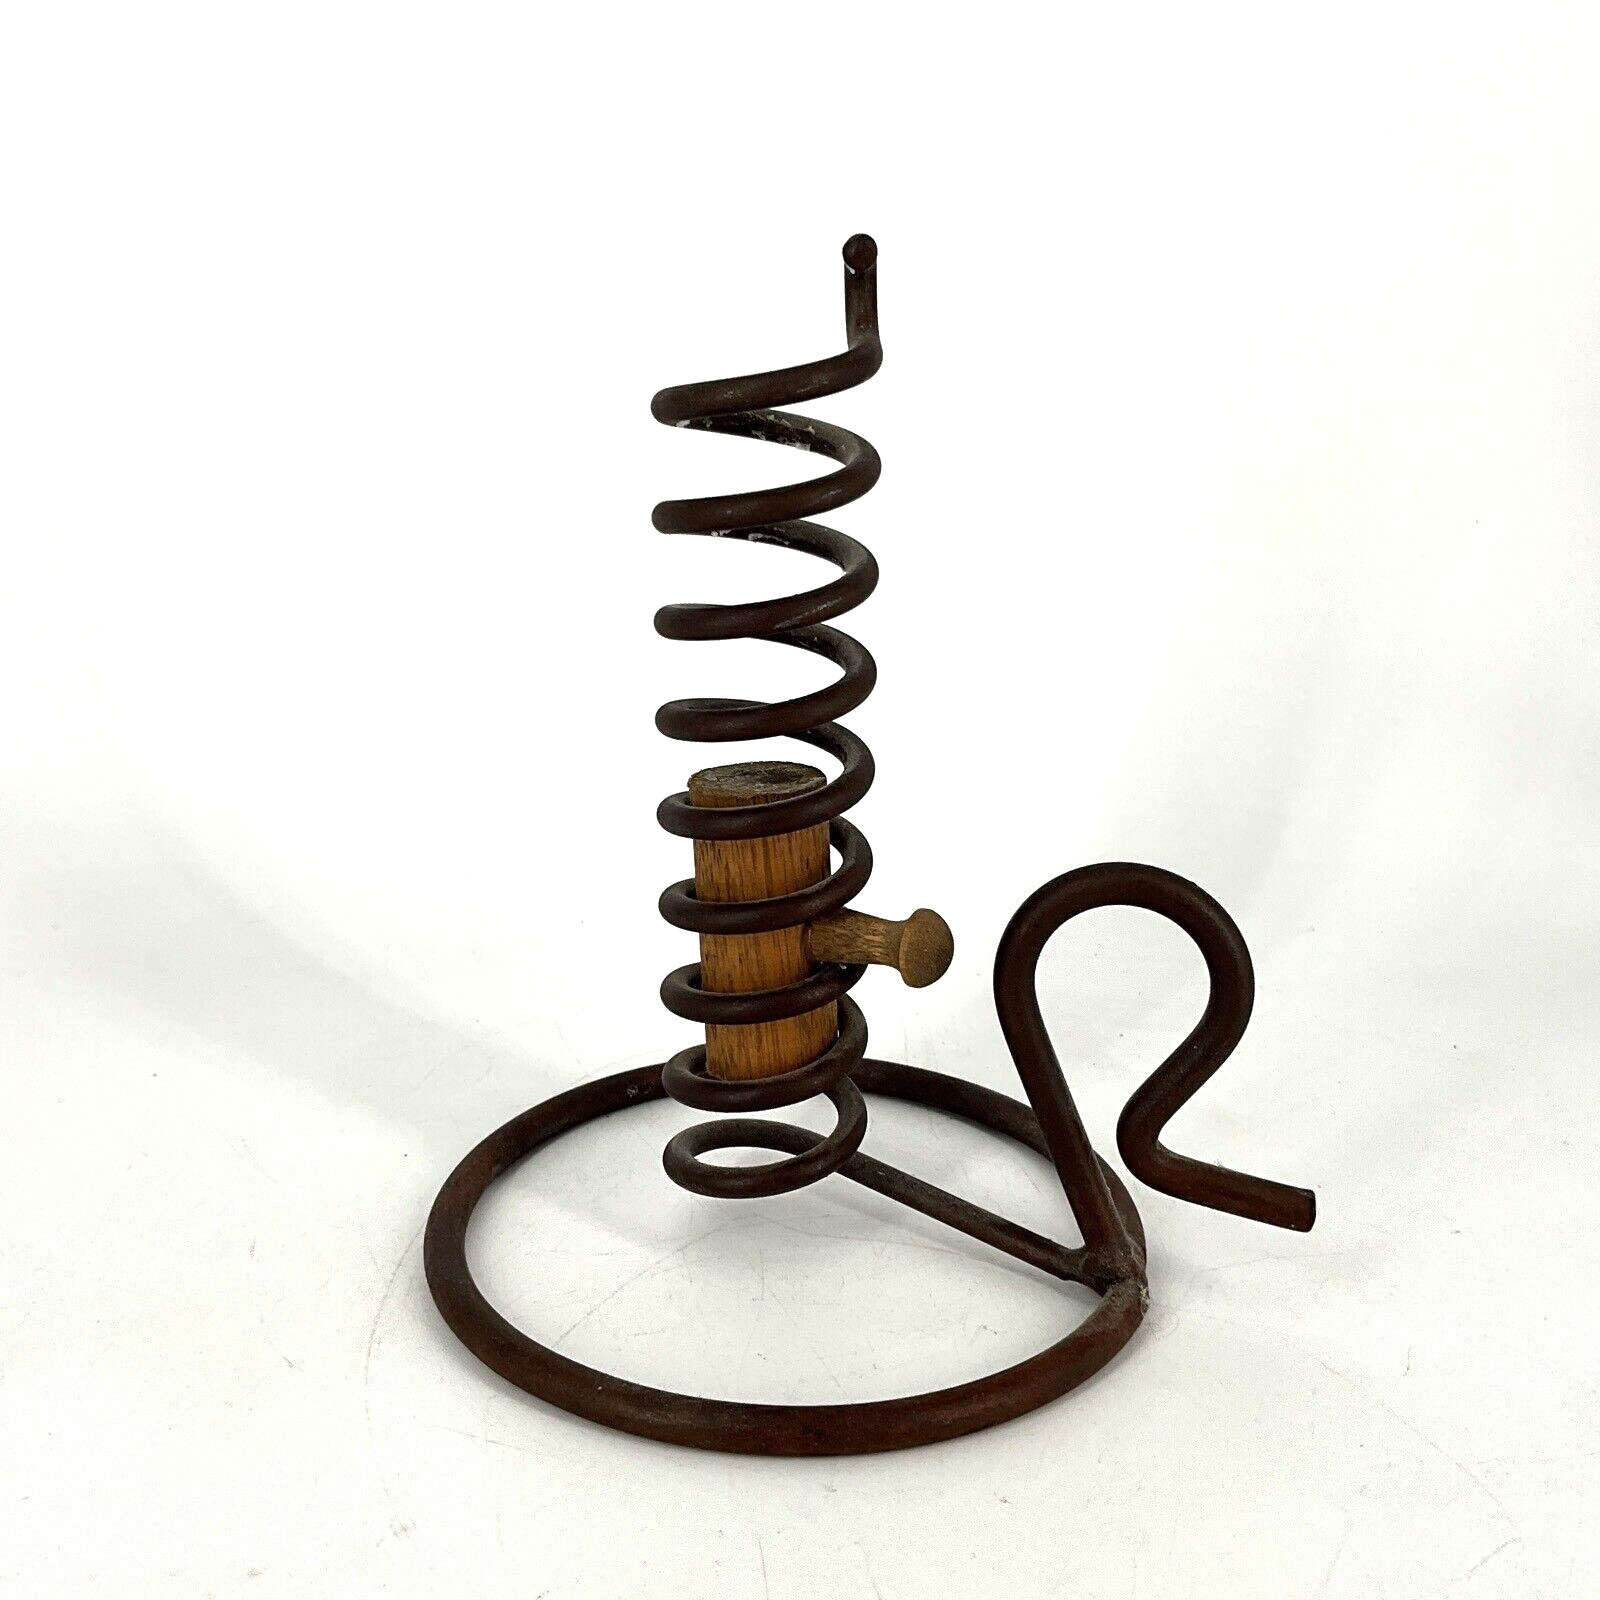 Vintage Primitive Wrought Iron Spiral Courting Candle Holder with Wood Lift